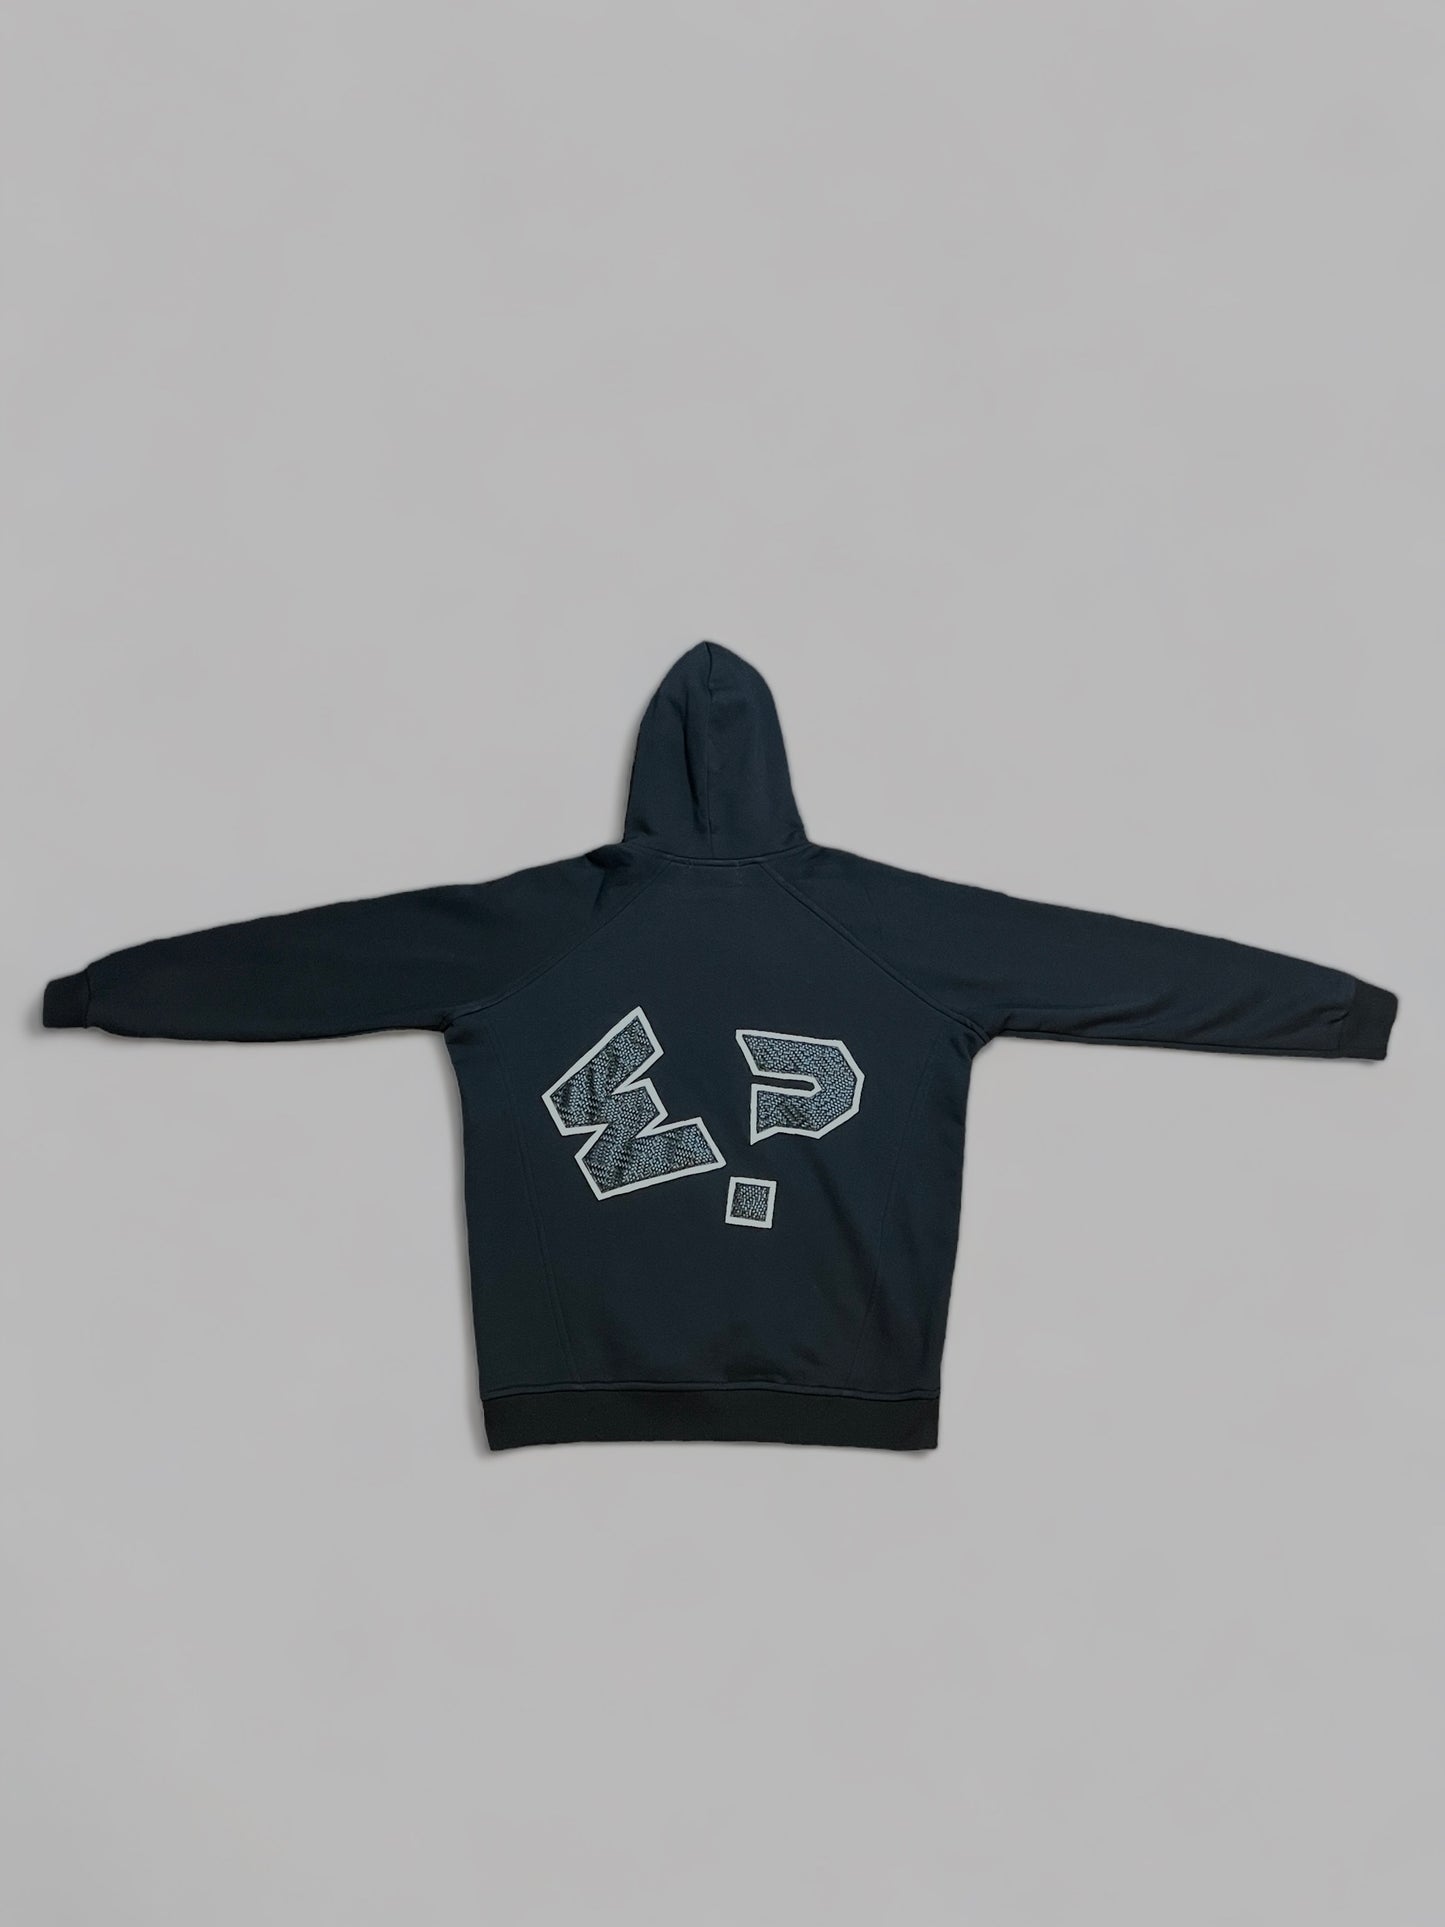 WHOW€ARE Hoodie v1